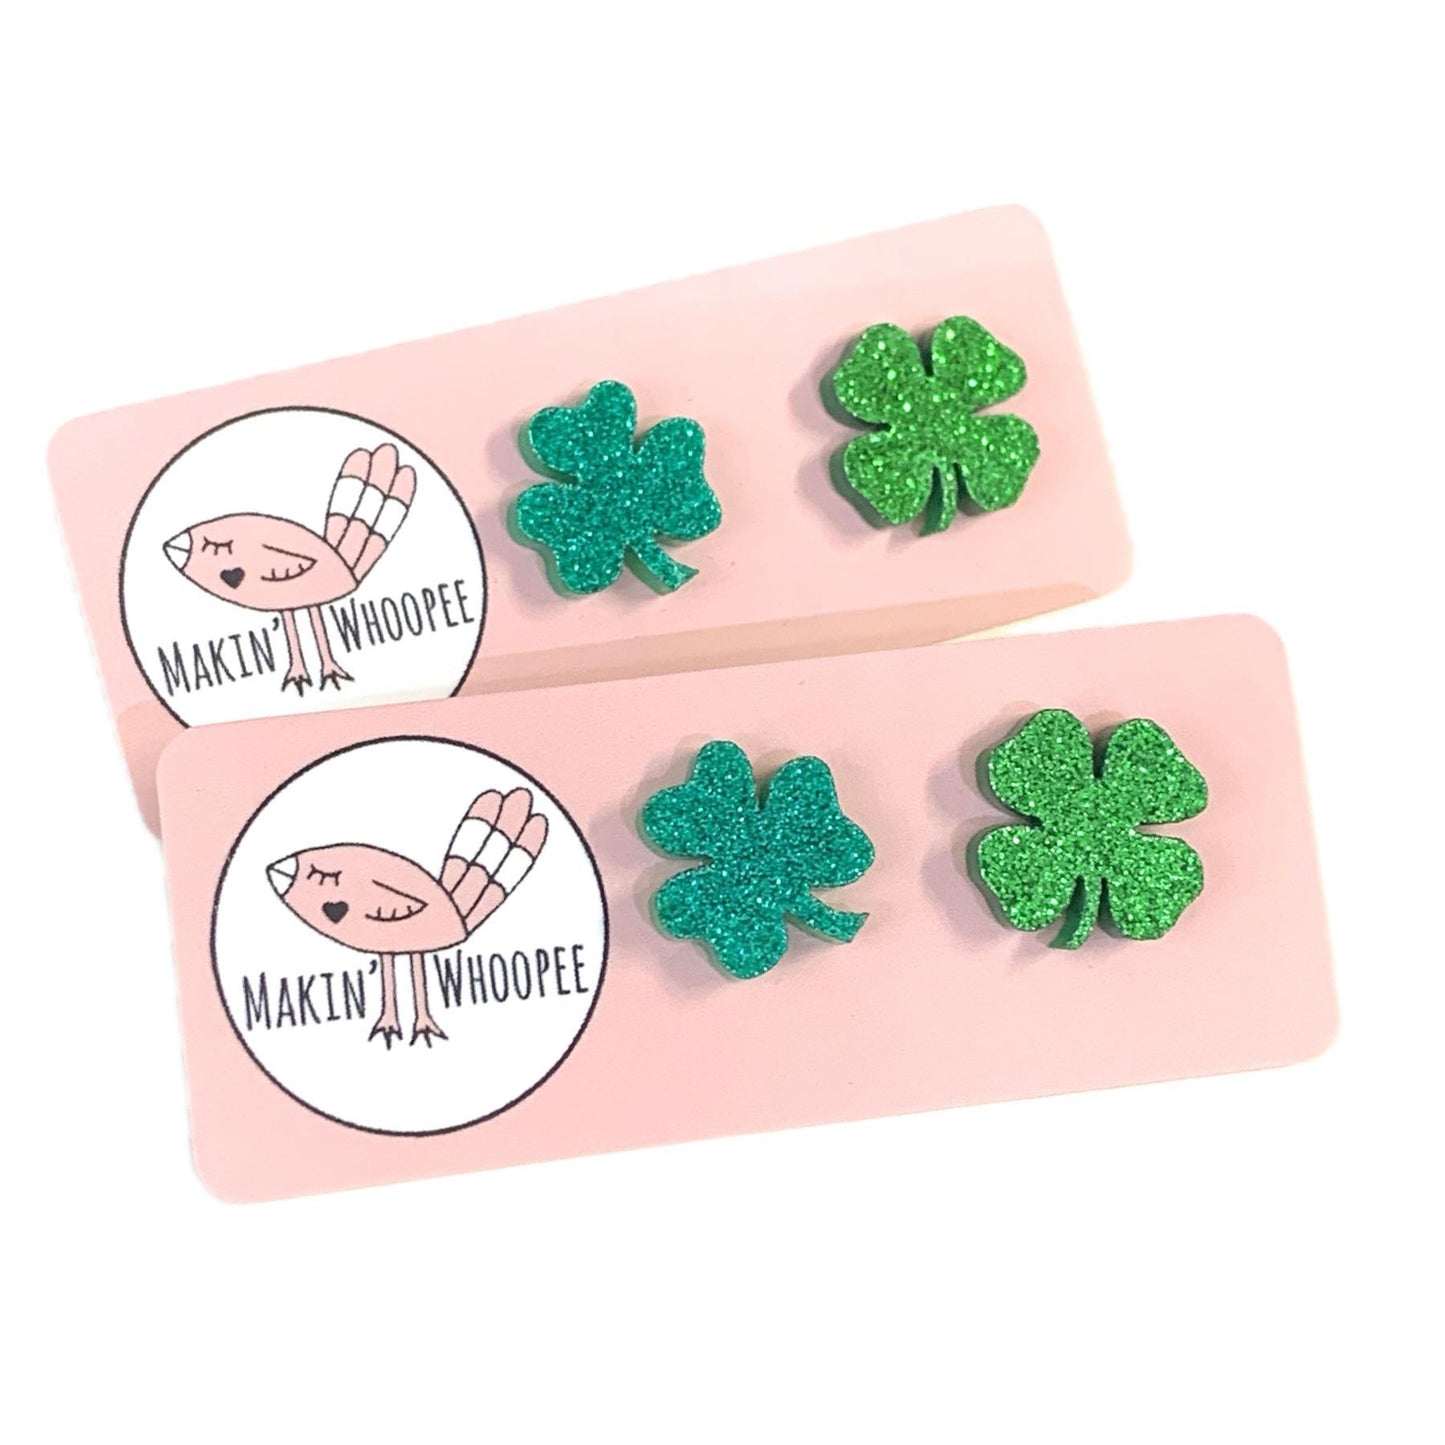 MAKIN' WHOOPEE - Mismatched Shamrock & Clover Studs